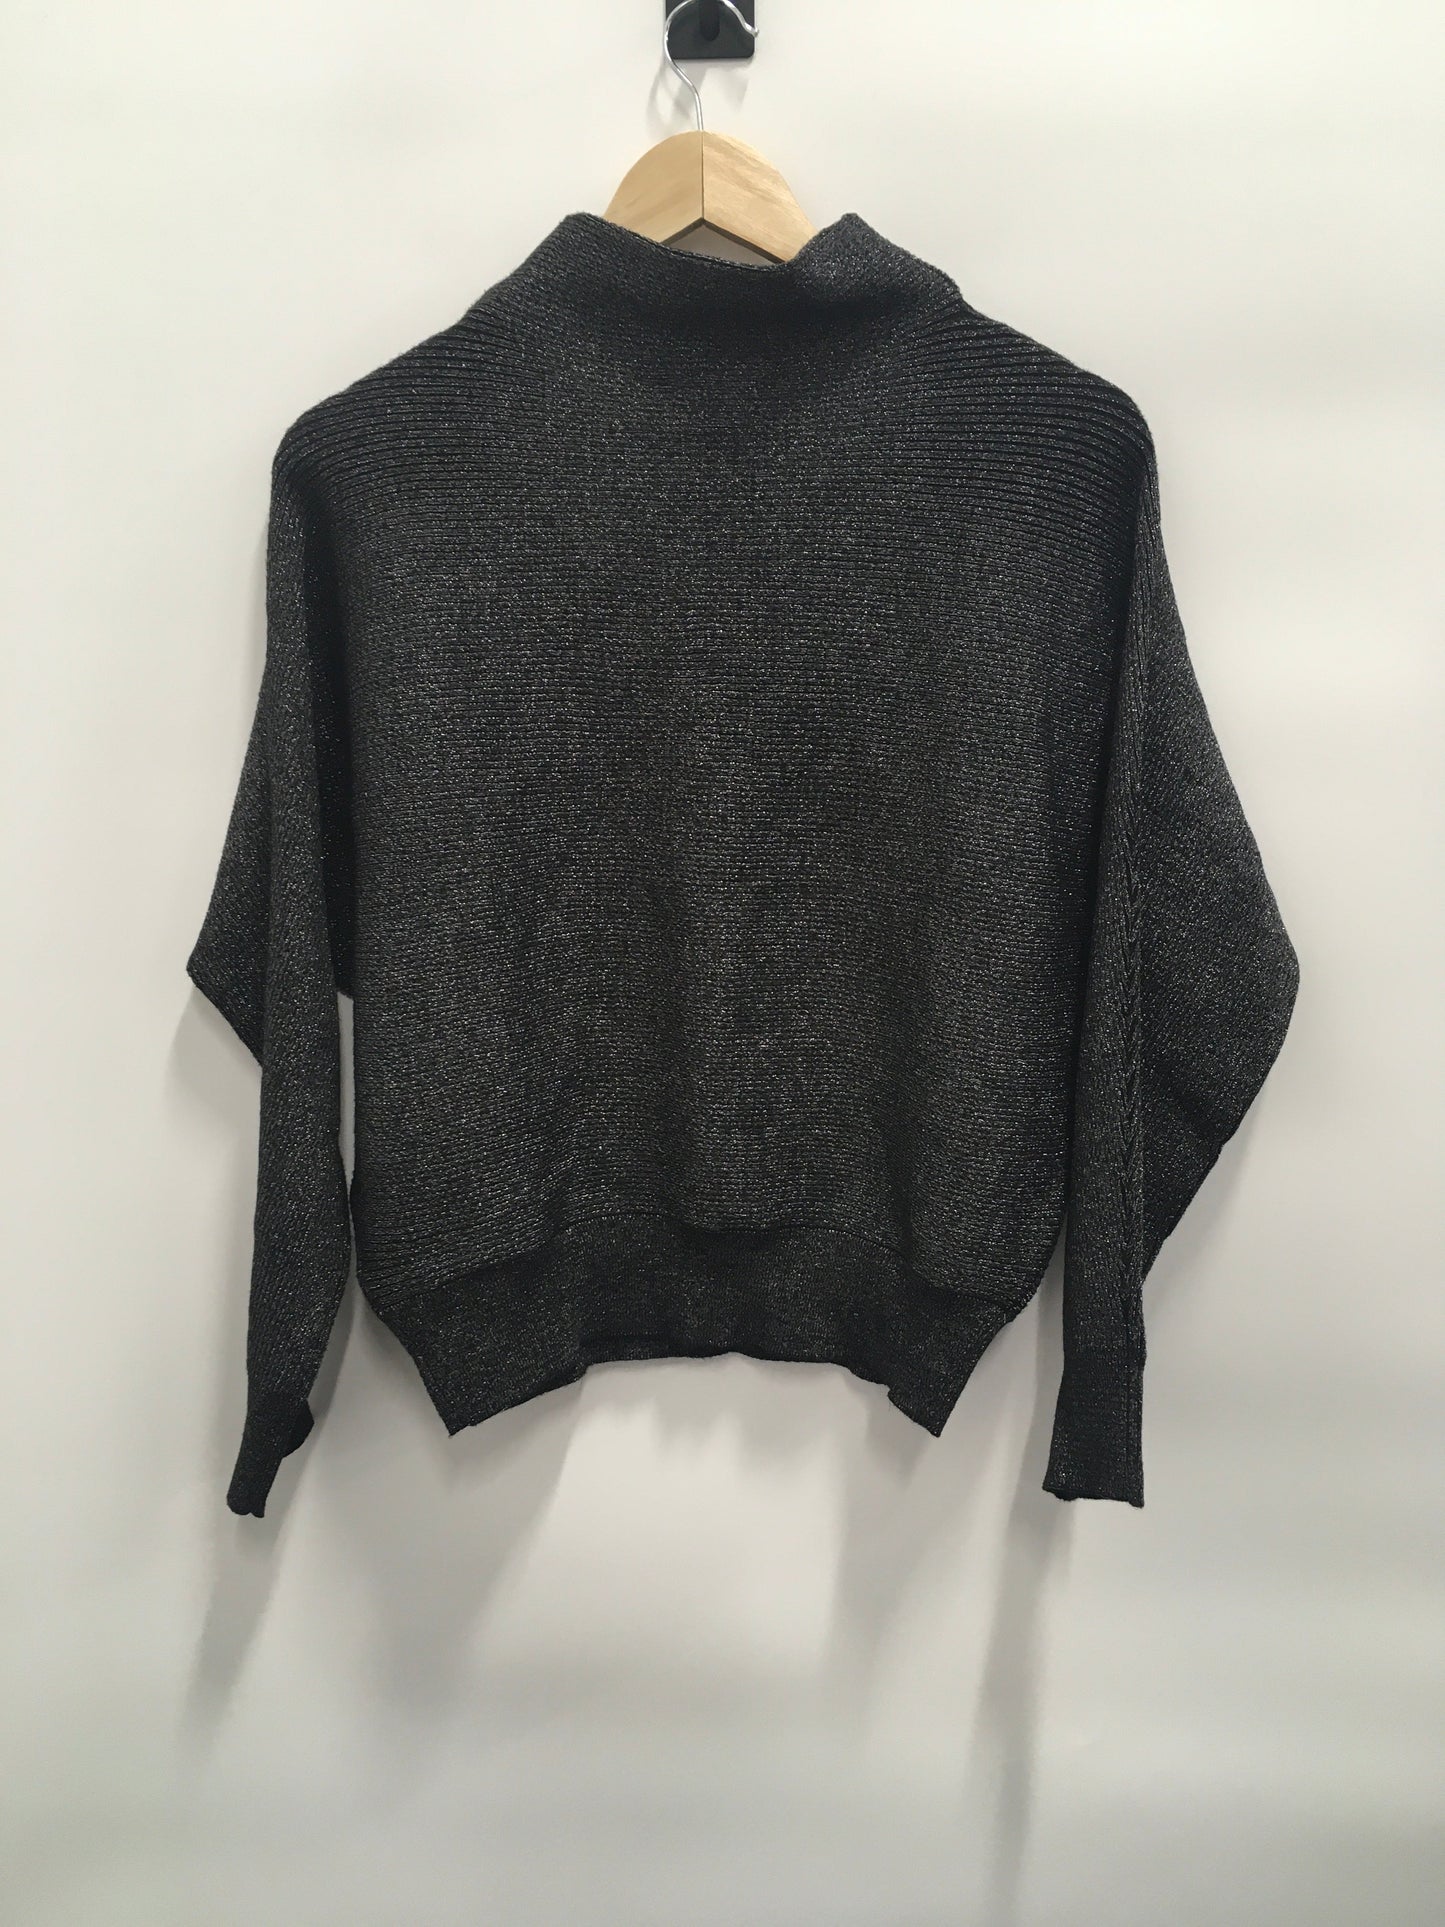 Top Long Sleeve By Premise  Size: M